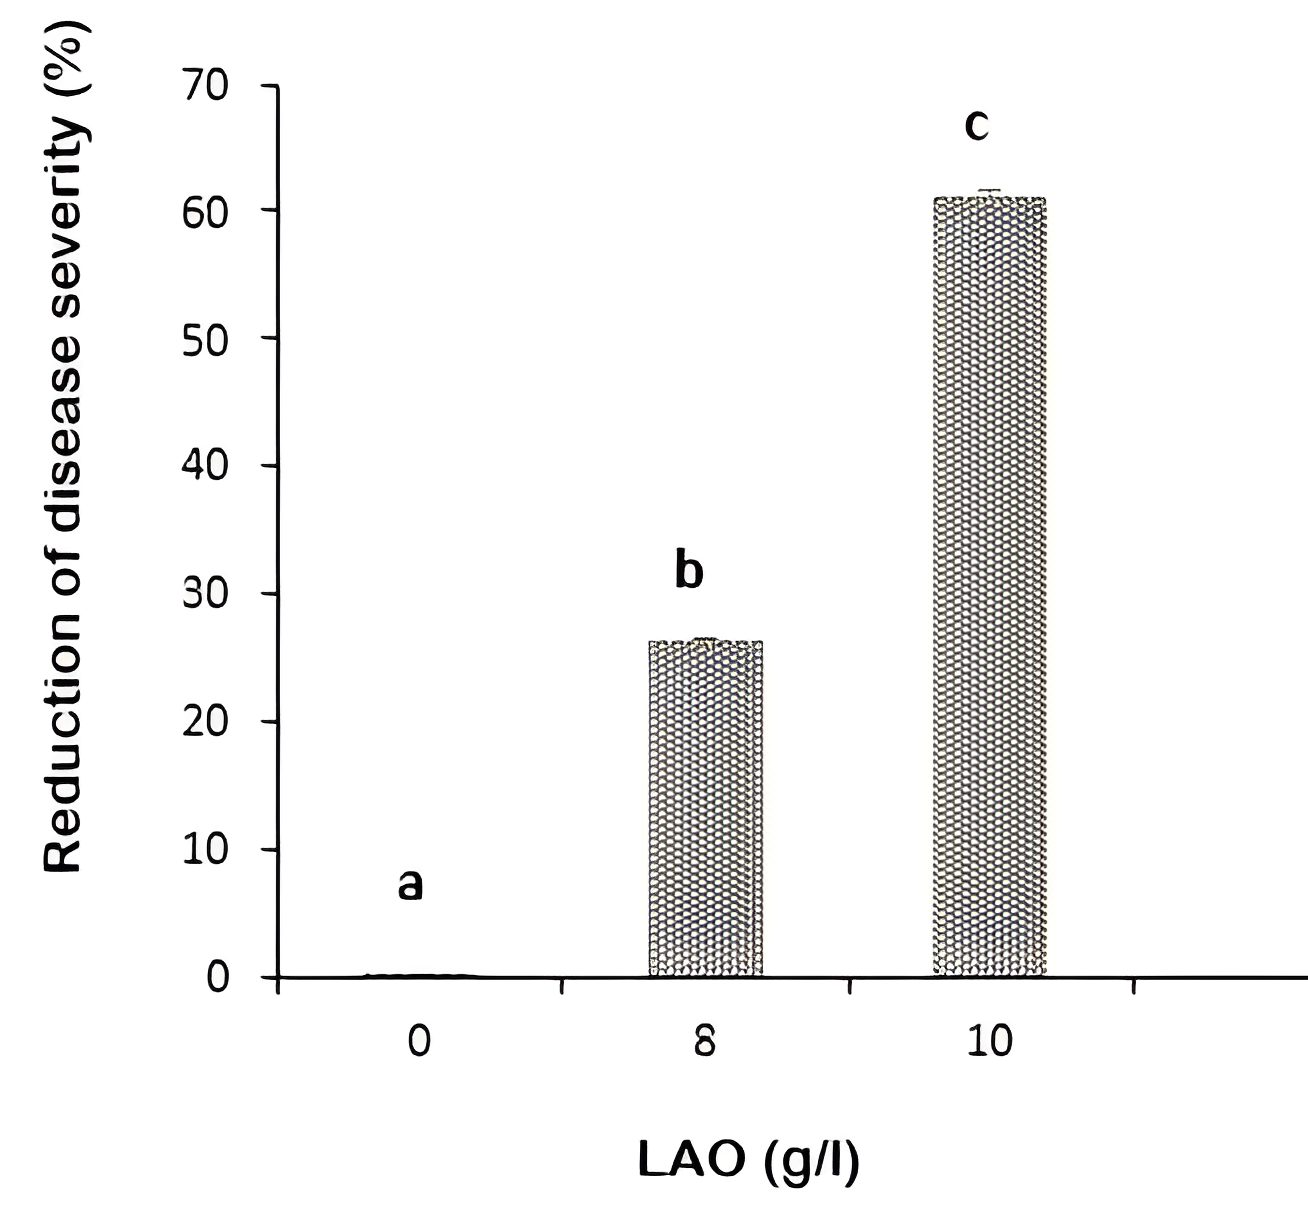 Effect of LAO different concentrations on disease severity in potato tubers inoculated with A. alternata mycelium